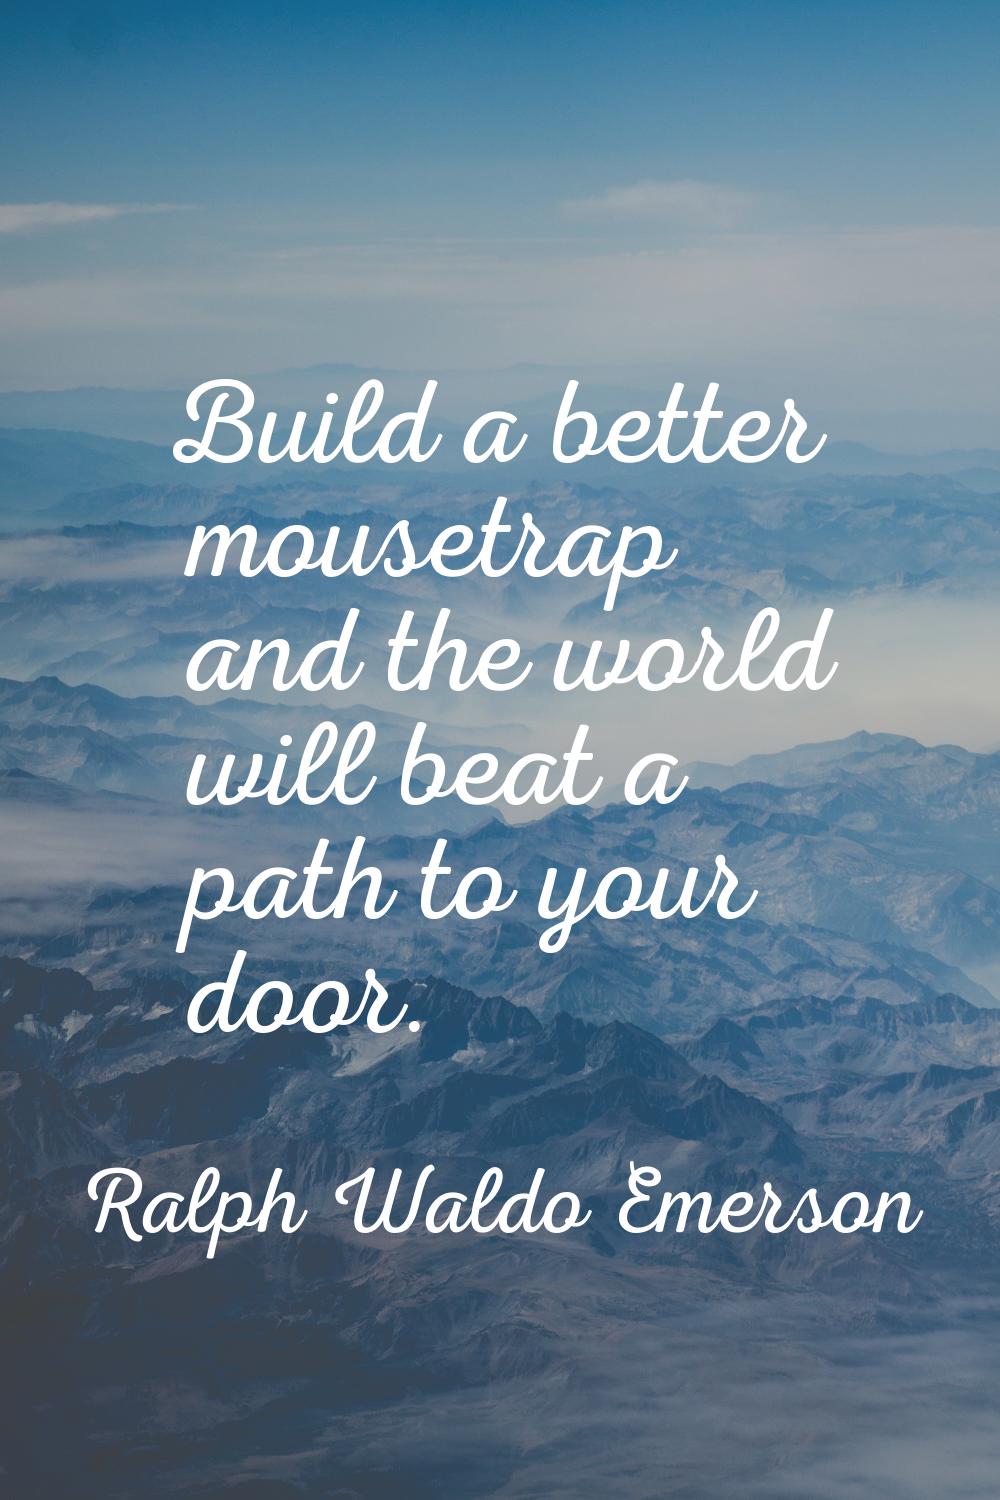 Build a better mousetrap and the world will beat a path to your door.